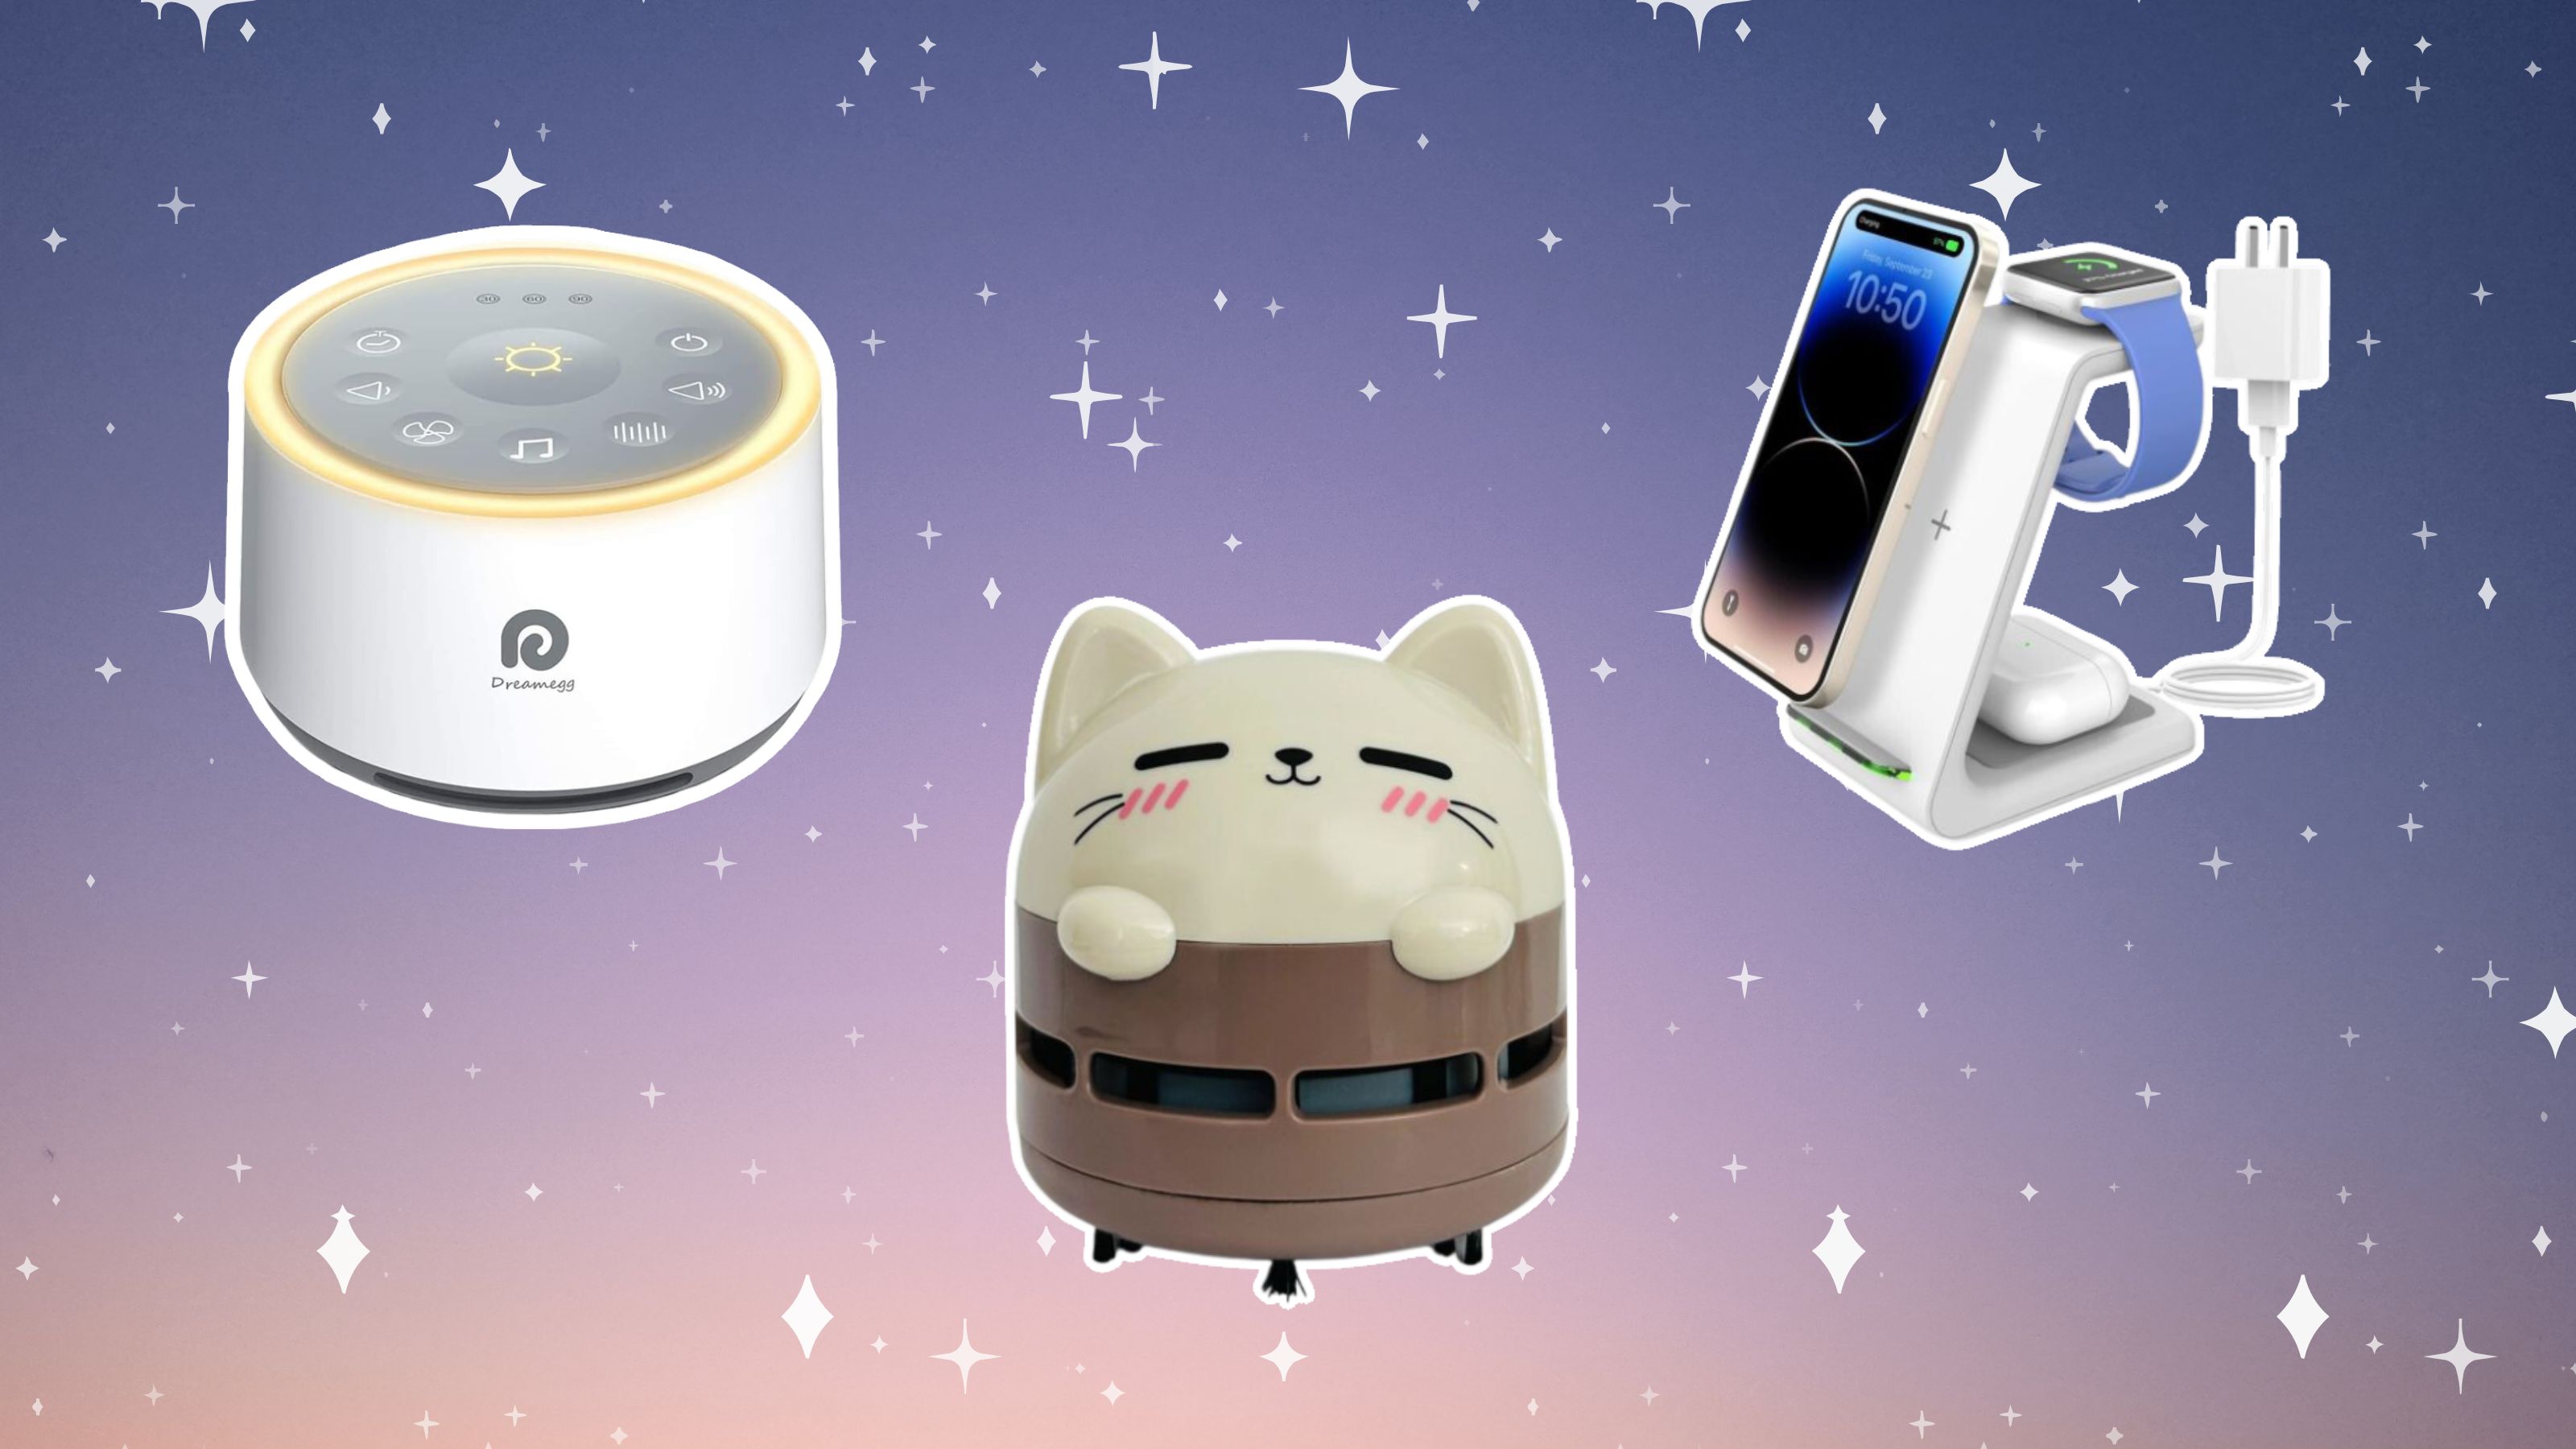 Most comfortable bedroom gadgets and accessories: smart mattresses,  odor-resistant bedding, and more » Gadget Flow